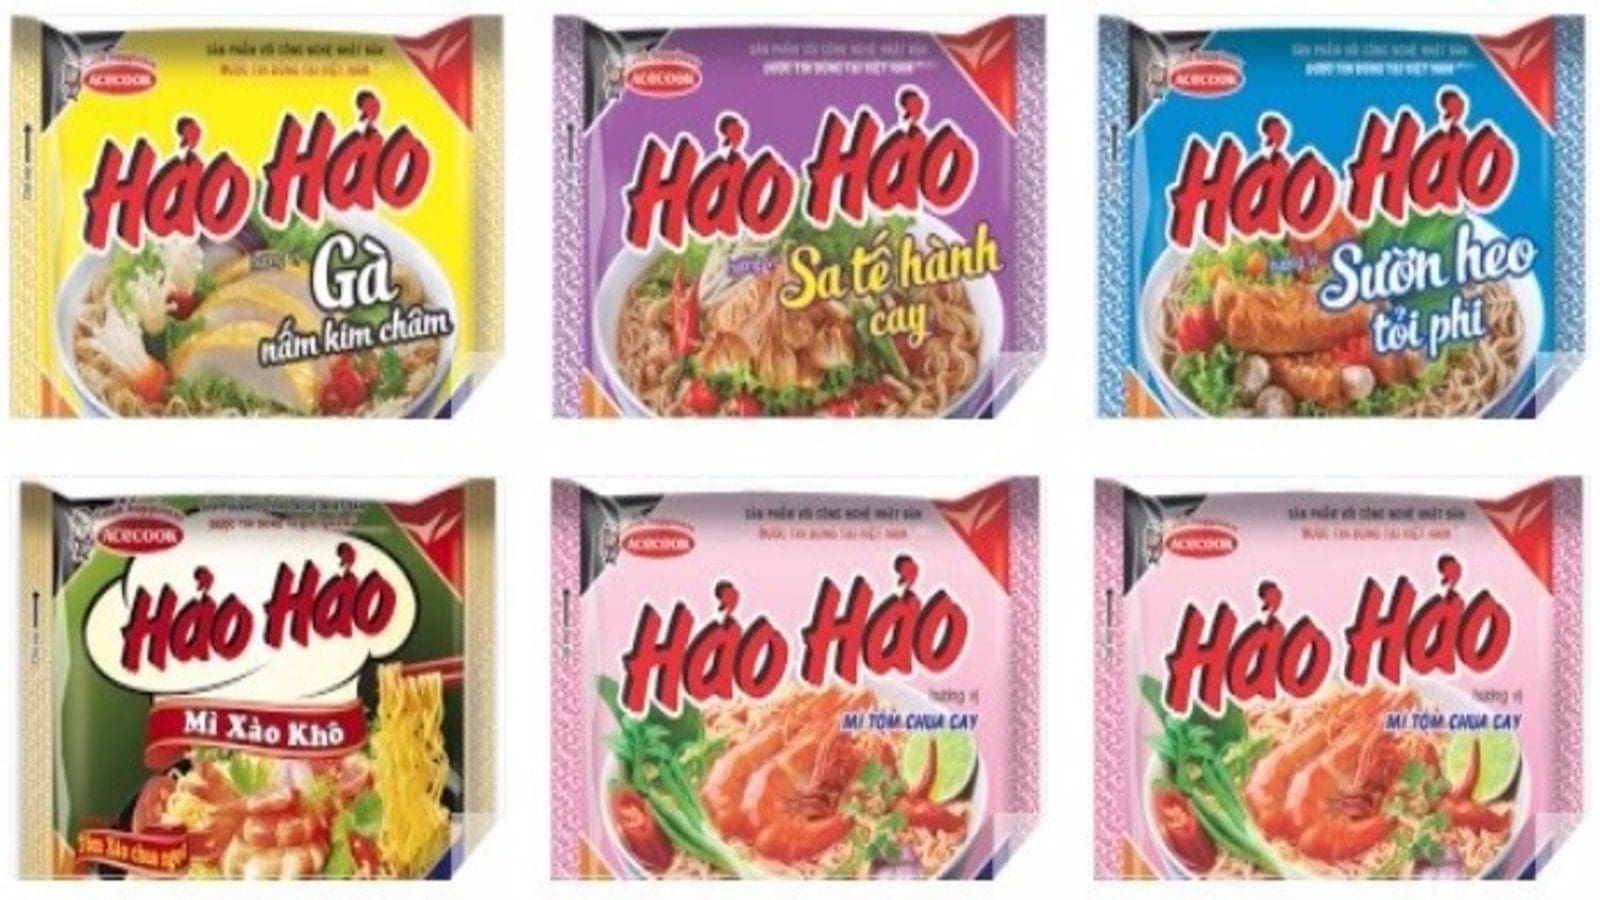 Vietnam’s giant noodle makers Acecook, Thien Huong face products recall